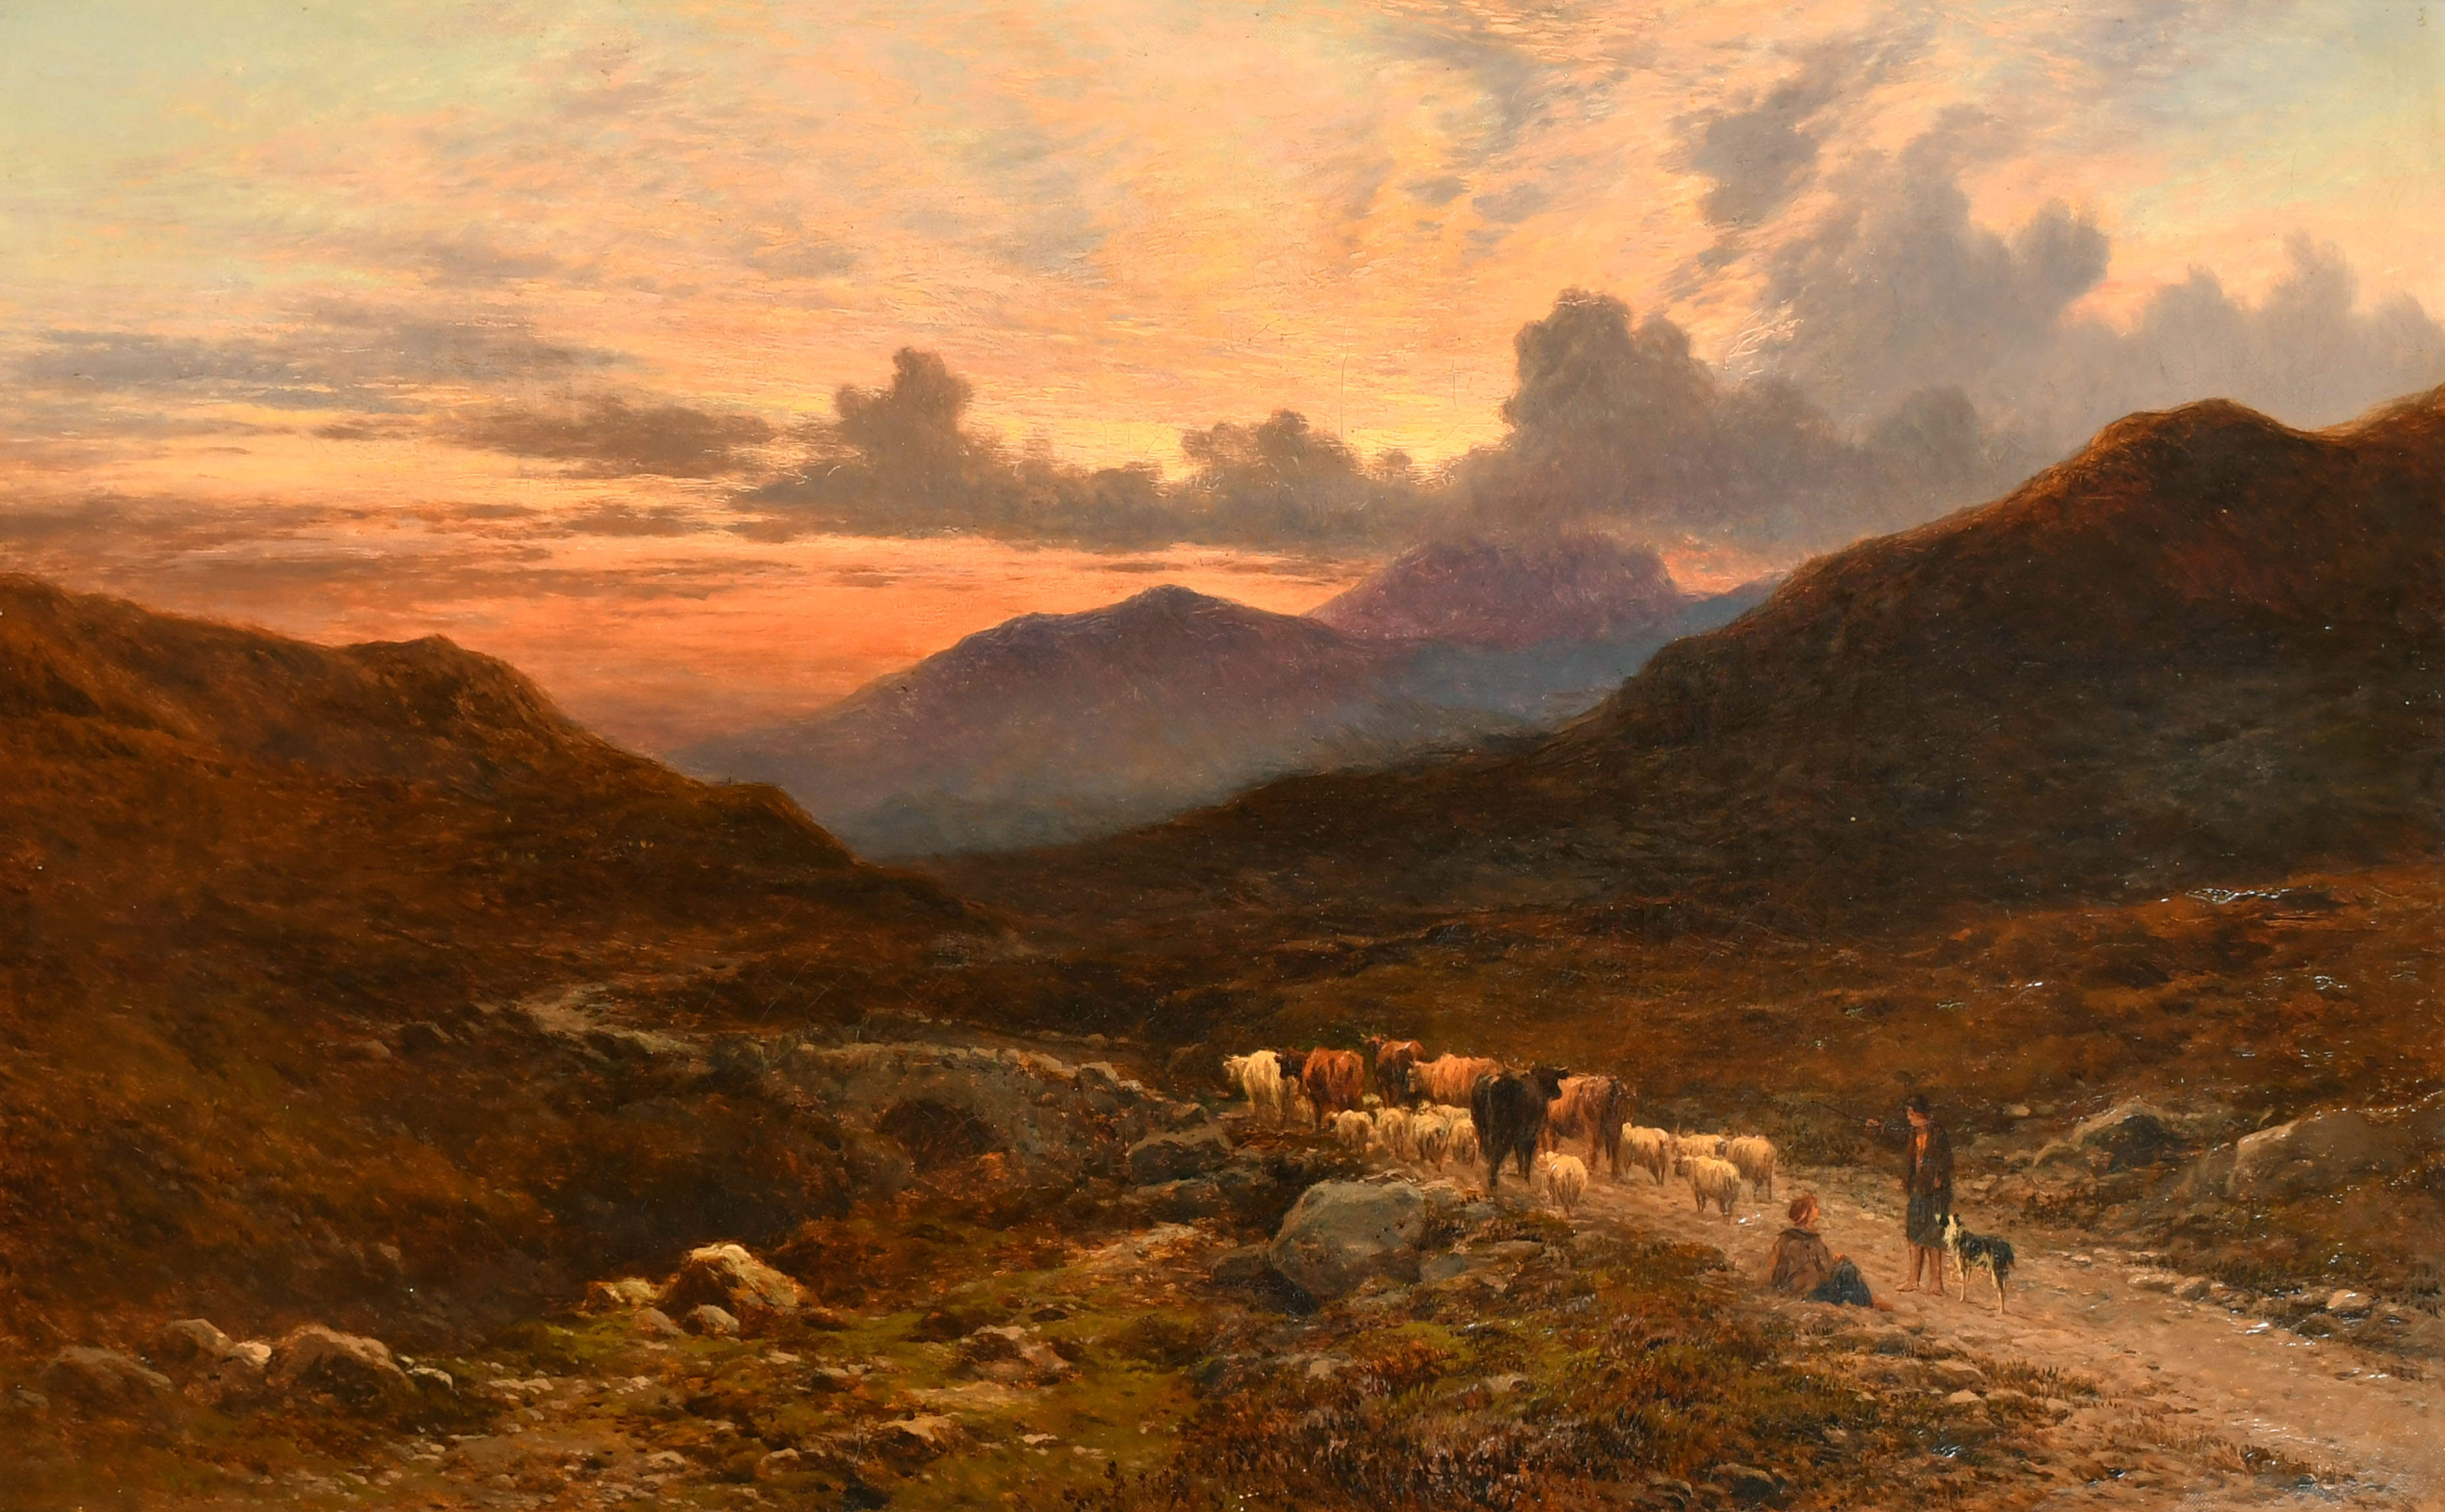 Circle of Sidney Richard Percy (1821-1886) British. A Shepherd and Flock on a Mountain Path at